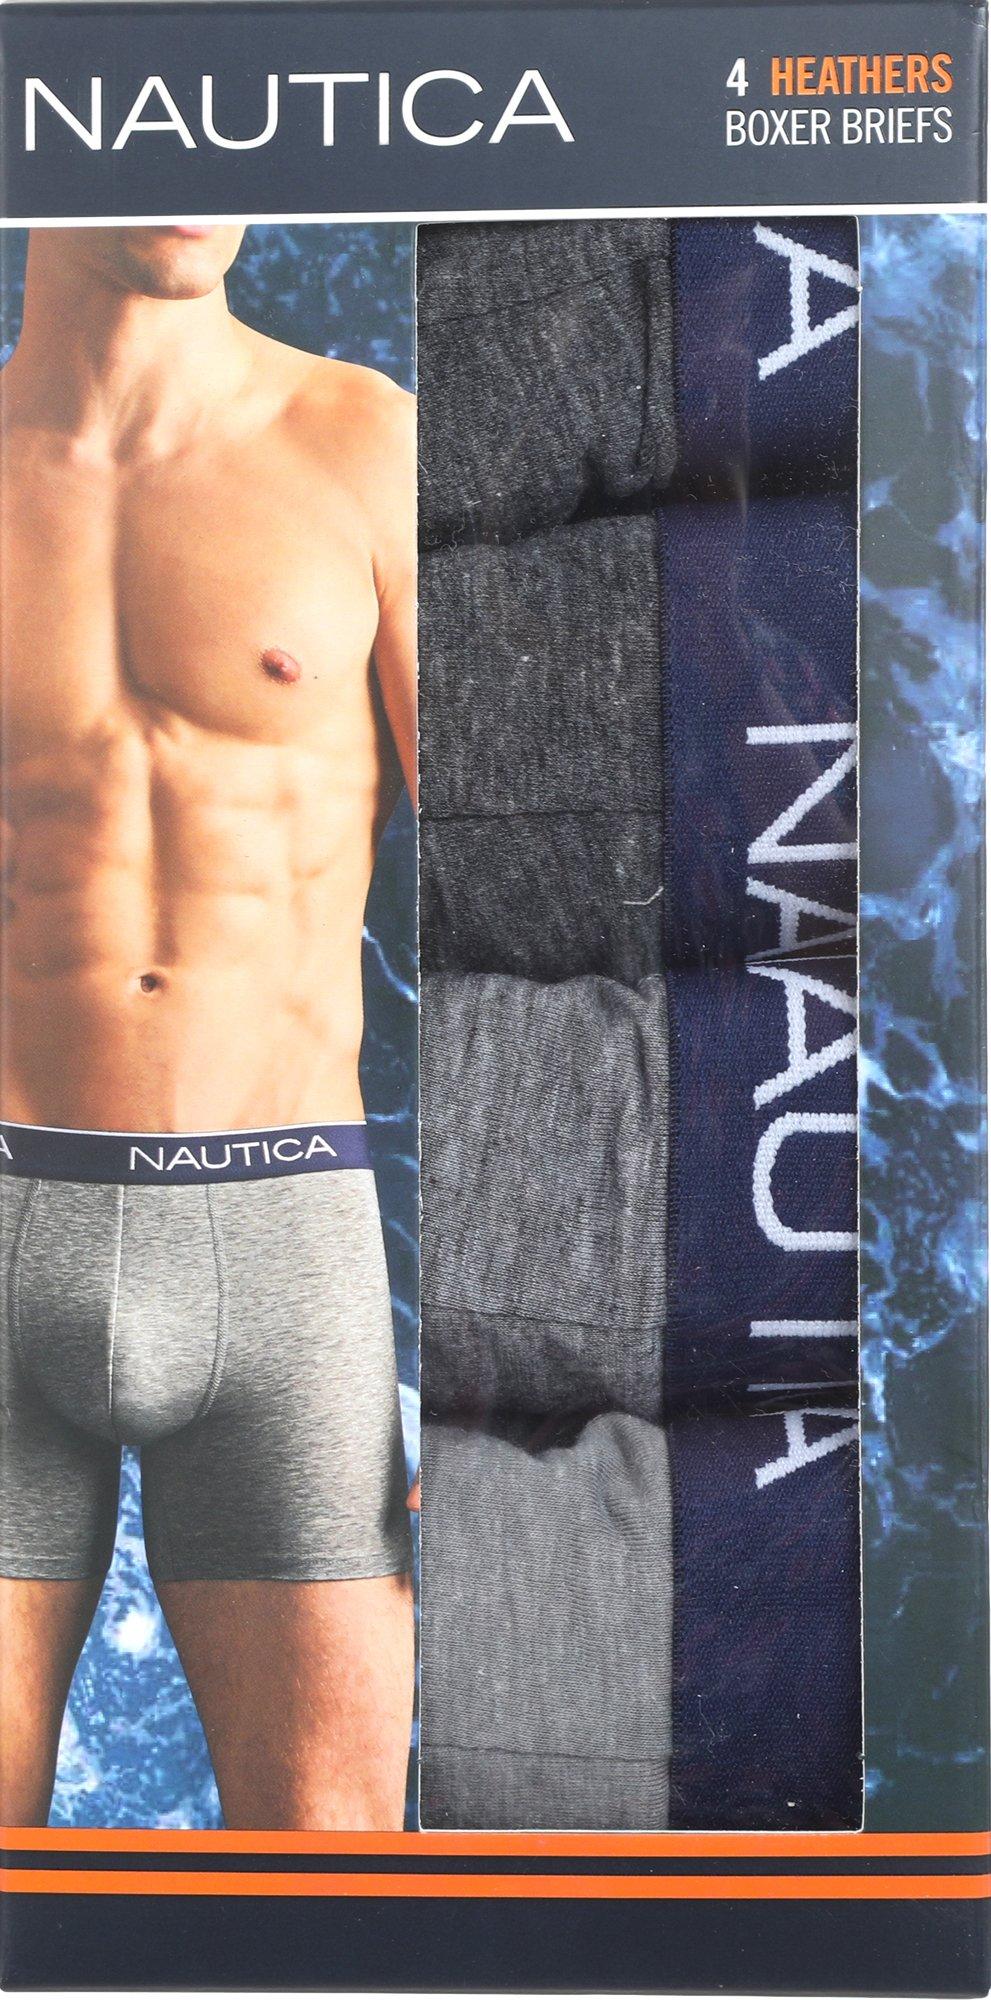 Buy Rocawear 4PK Performance Boxer Briefs Men's Loungewear from Rocawear.  Find Rocawear fashion & more at